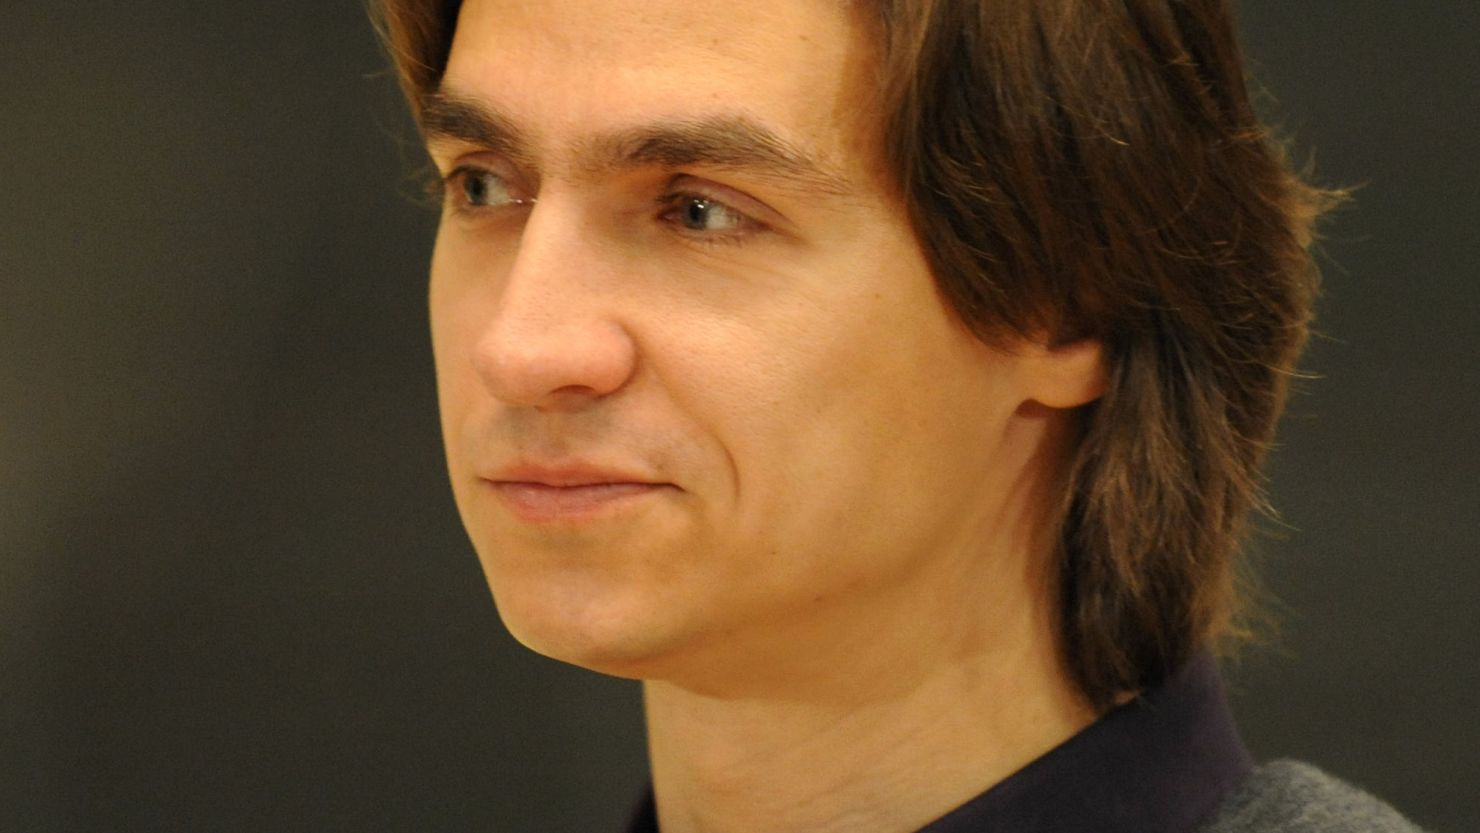 Sergei Filin, artistic director of the Russia's Bolshoi Ballet, was attacked with acid in January.